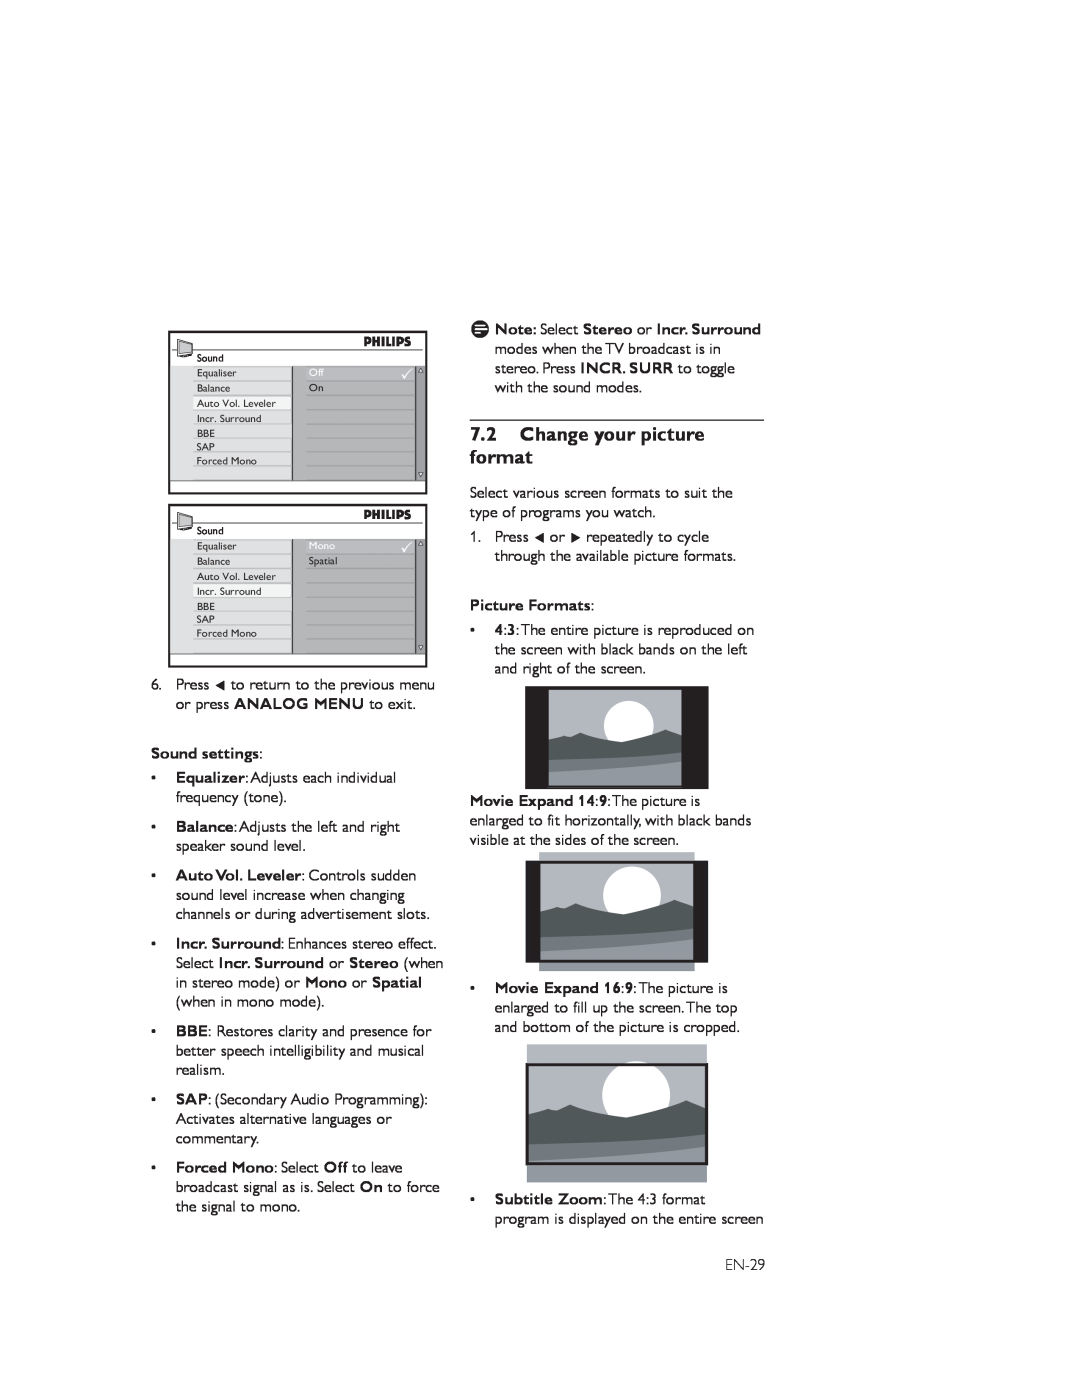 Philips 52PFL7803D, 42PFL7803D user manual 7.2Change your picture format, Sound settings, Picture Formats 